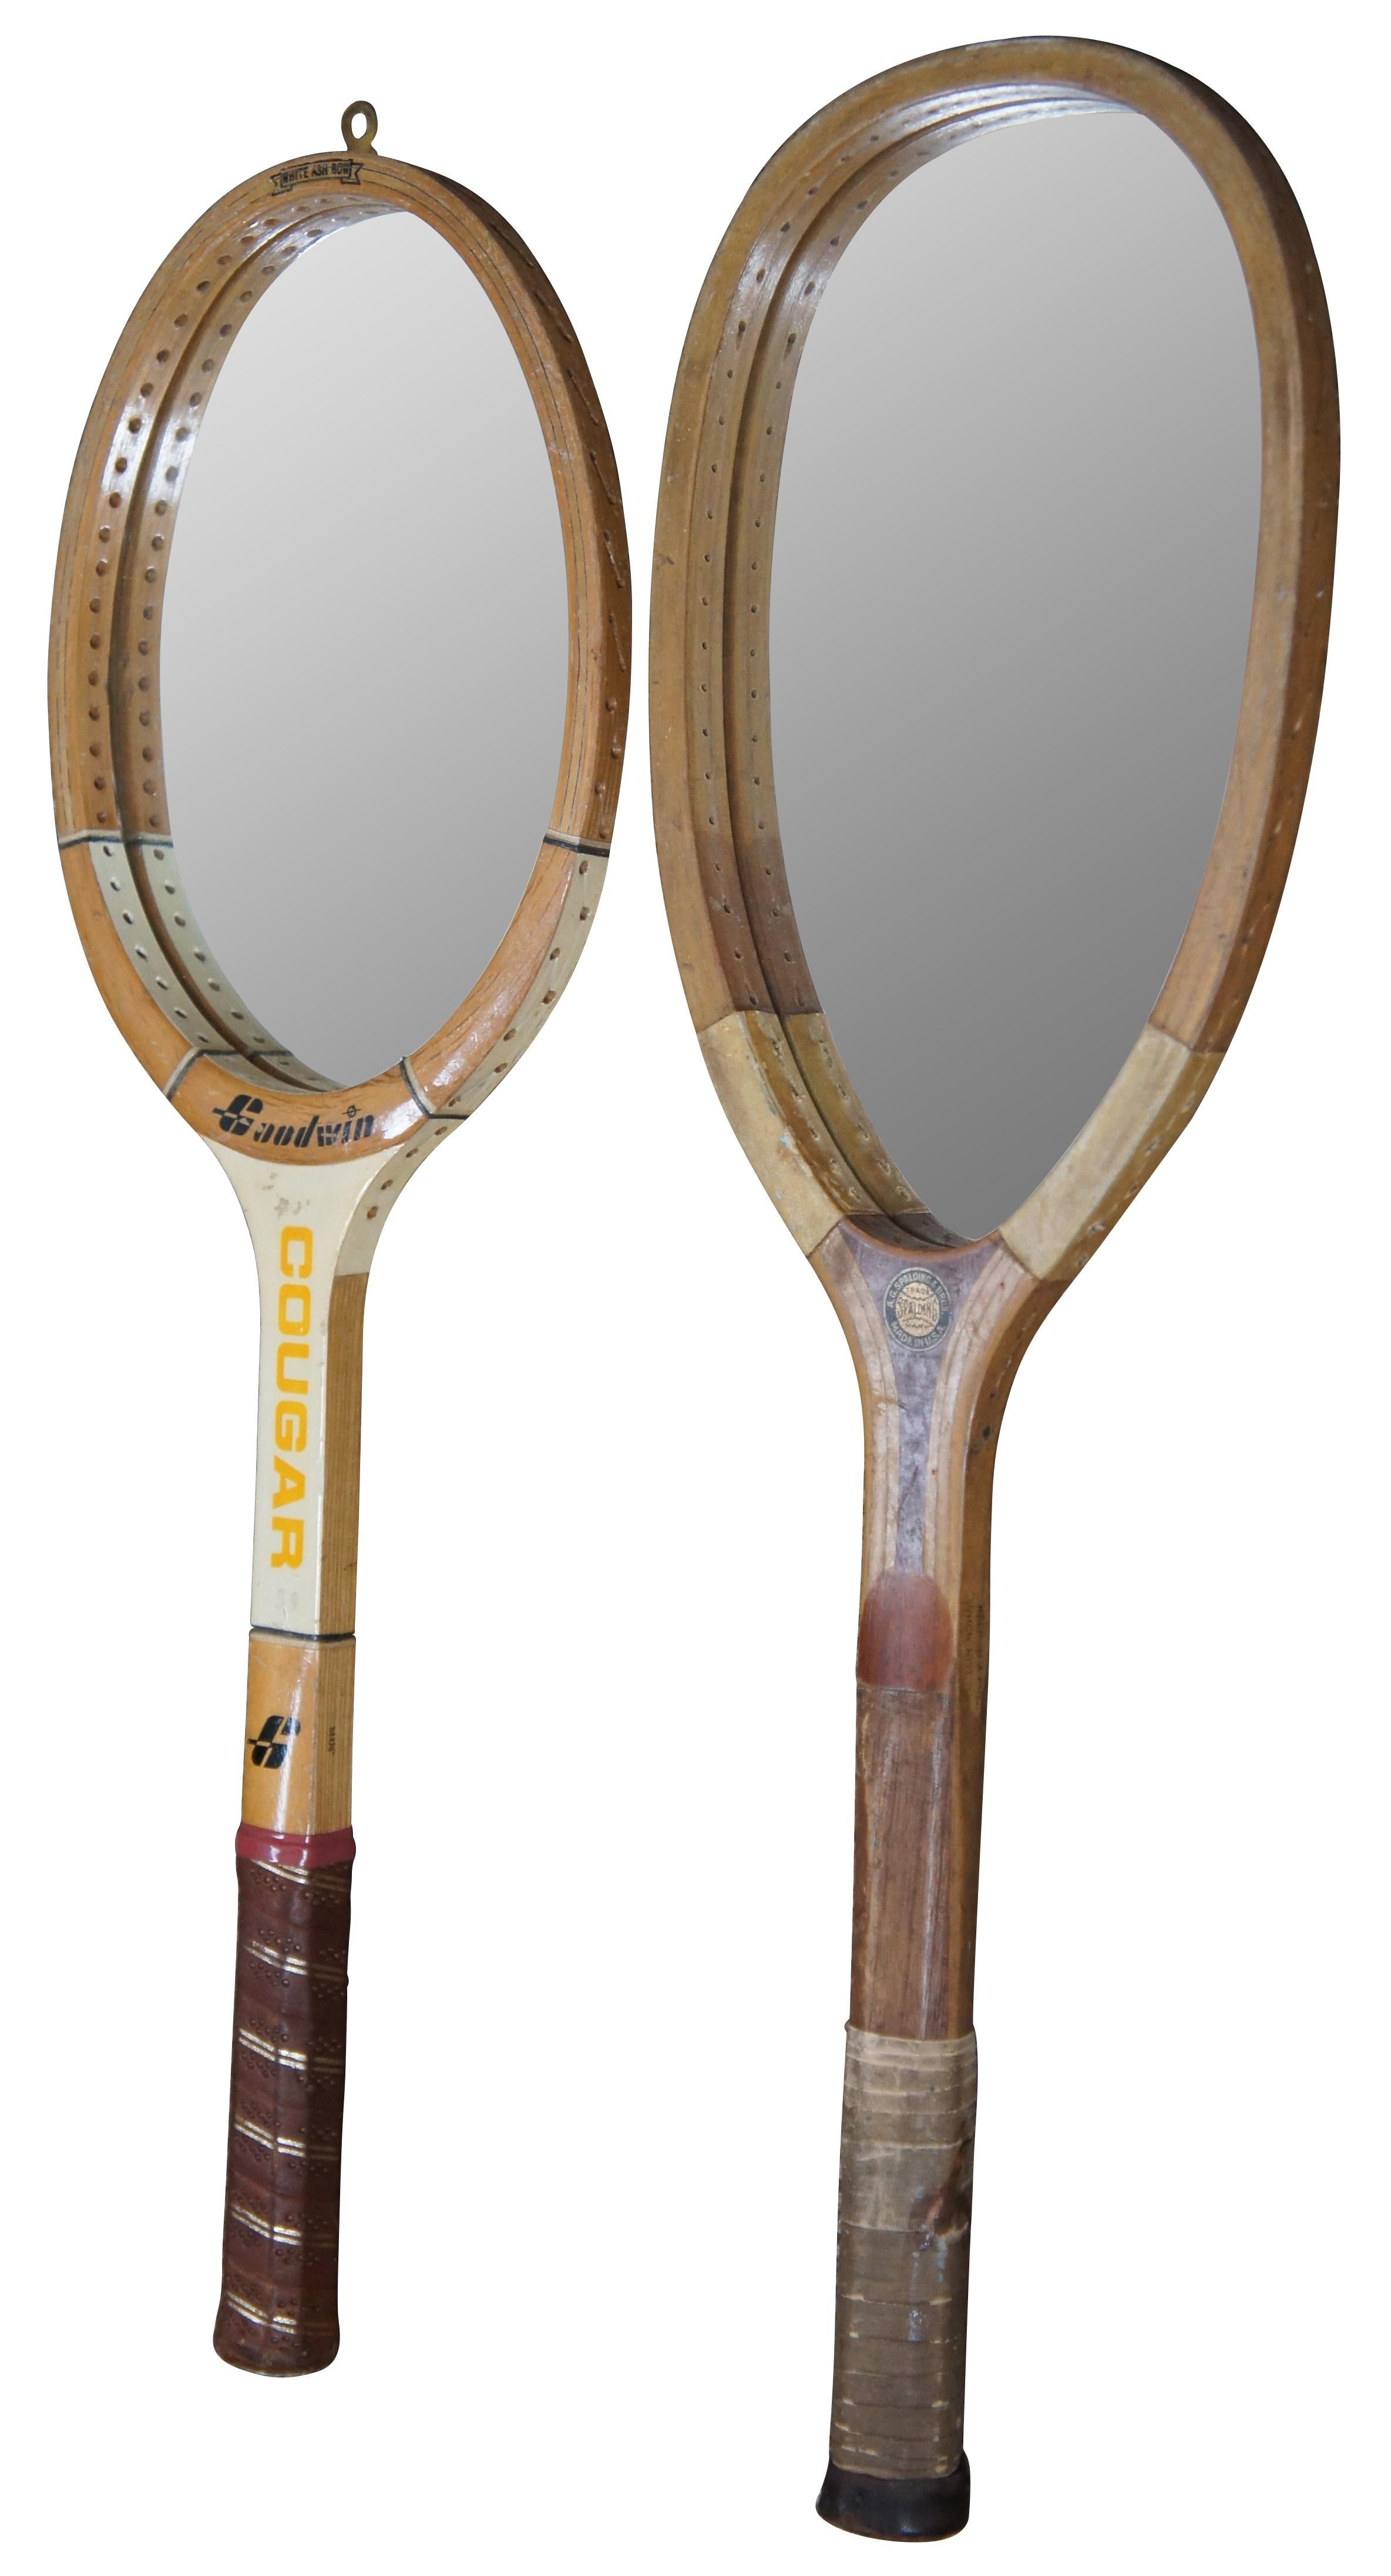 Pair of wall mirrors upcycled from vintage tennis rackets, one Goodwin Cougar and the other Spaulding & Bros Alexander.